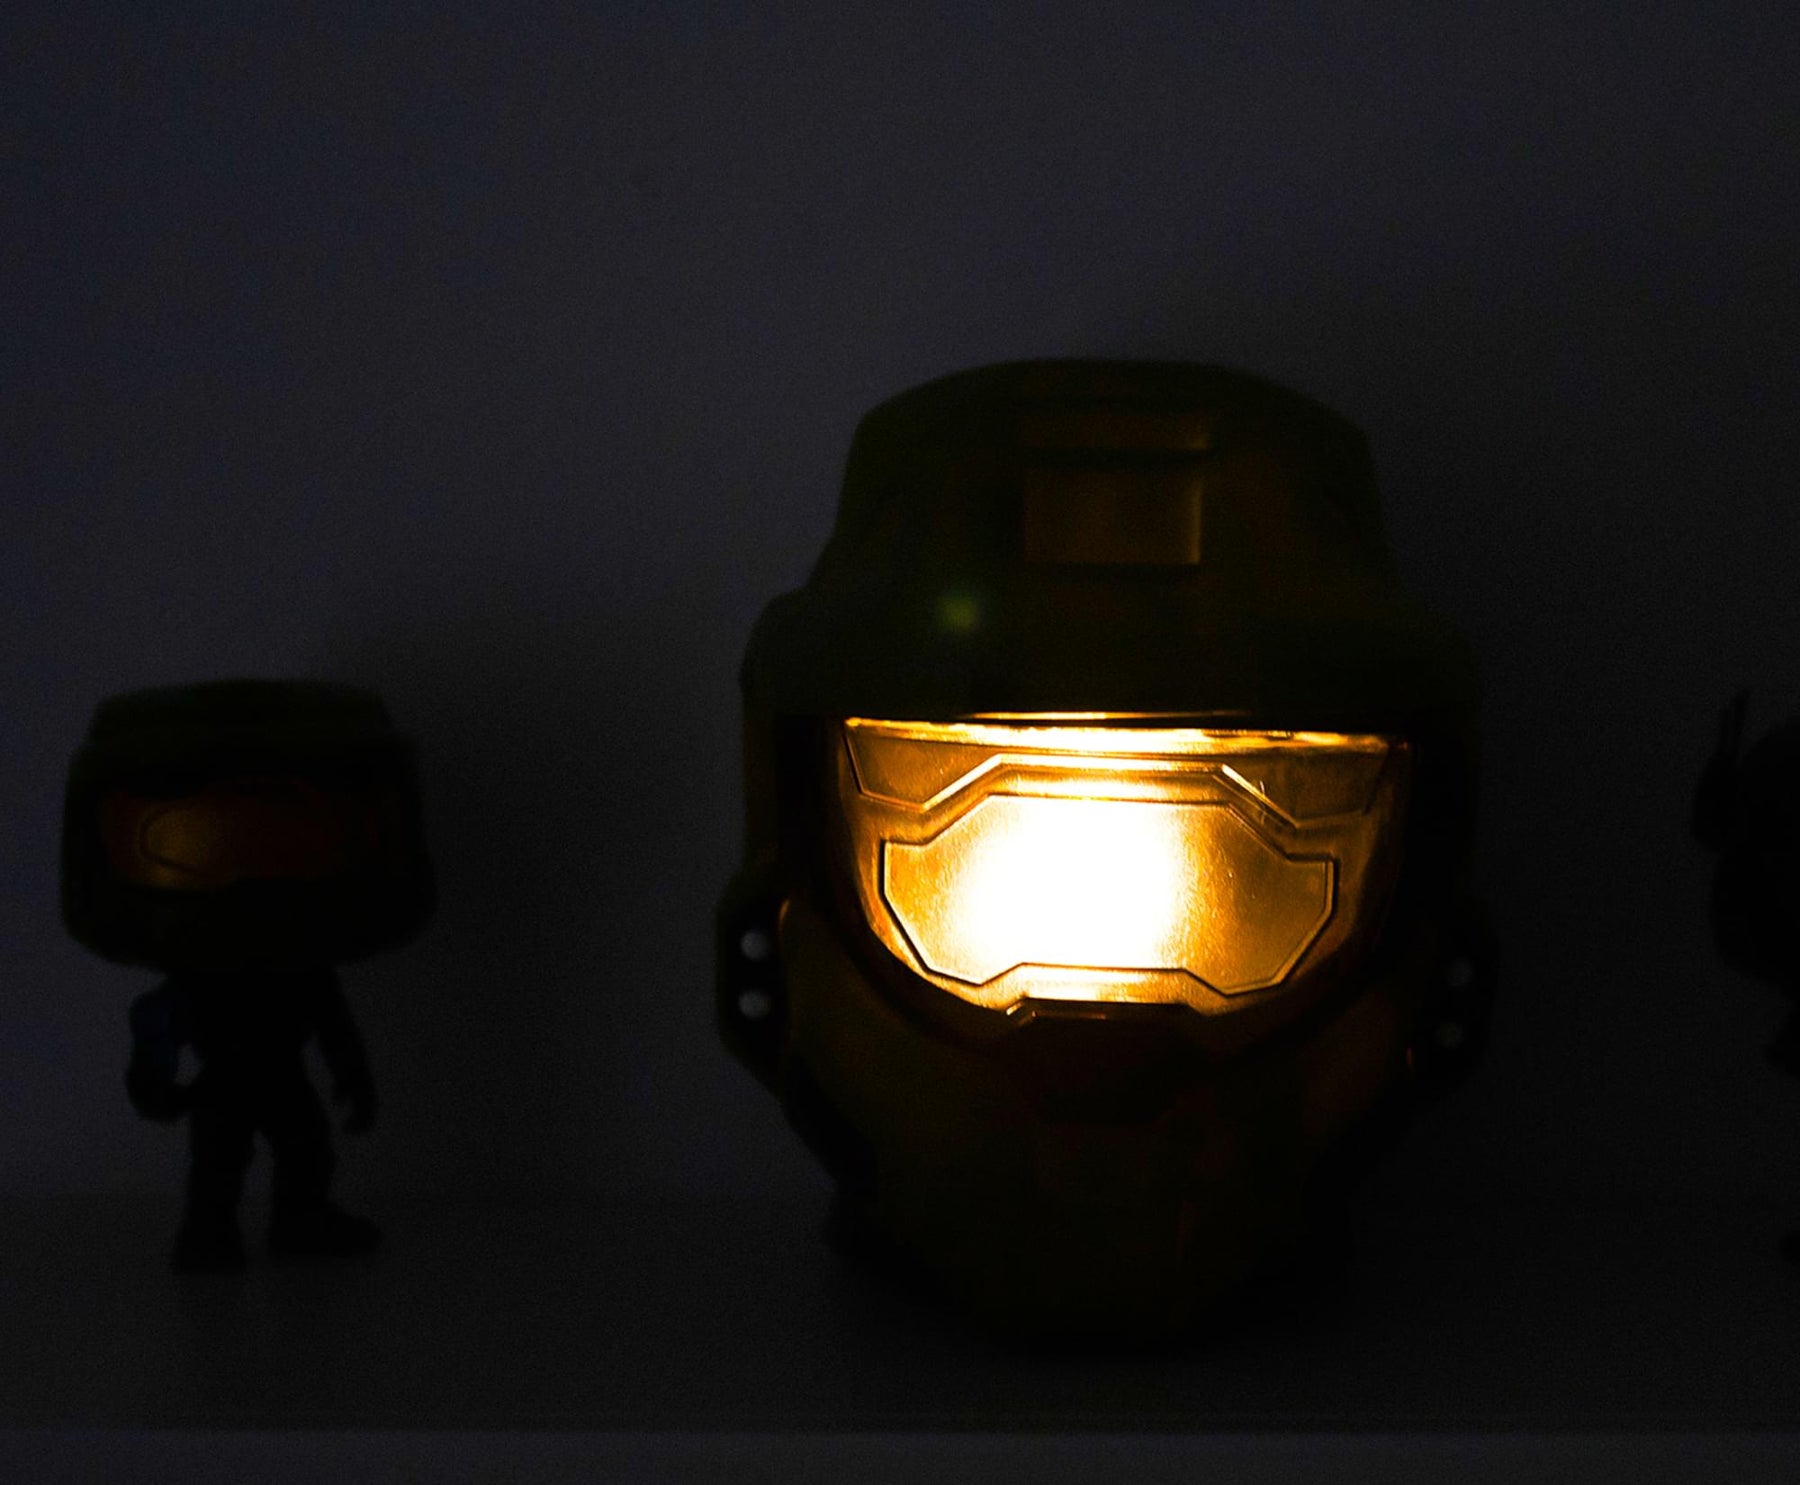 HALO Master Chief Helmet Figural Mood Light | 6 Inches Tall